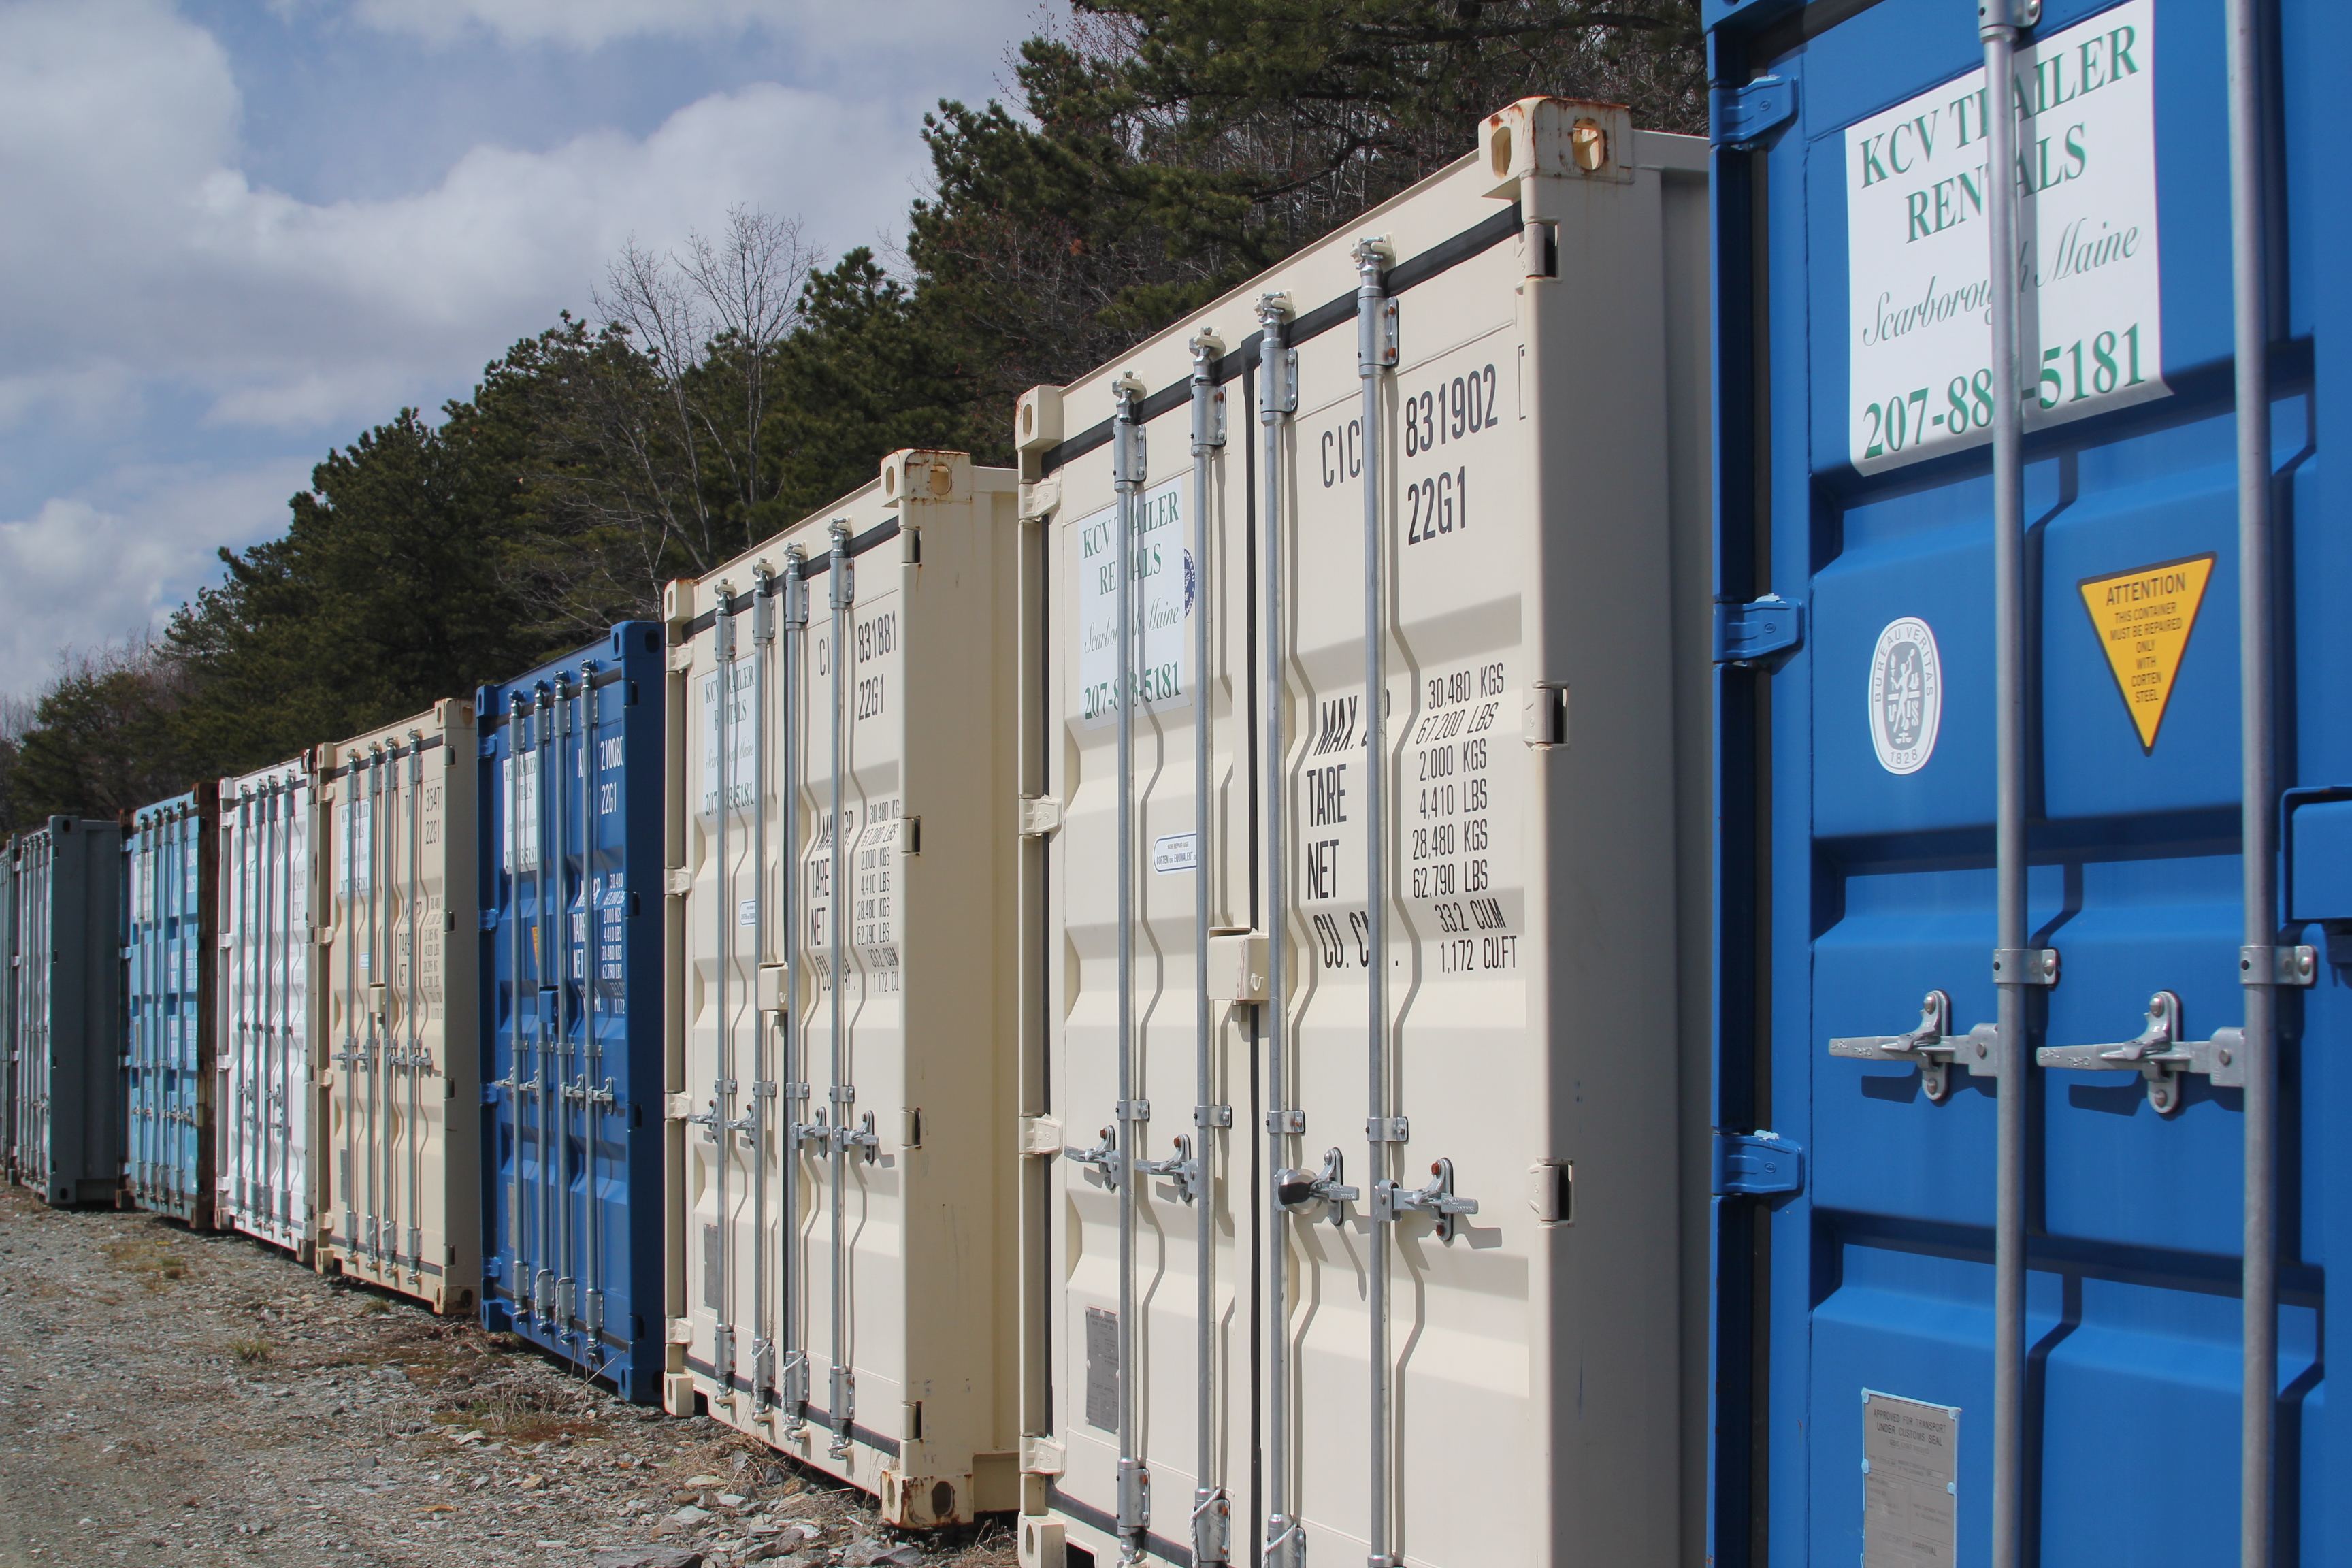 row of storage containers in scarborough, me